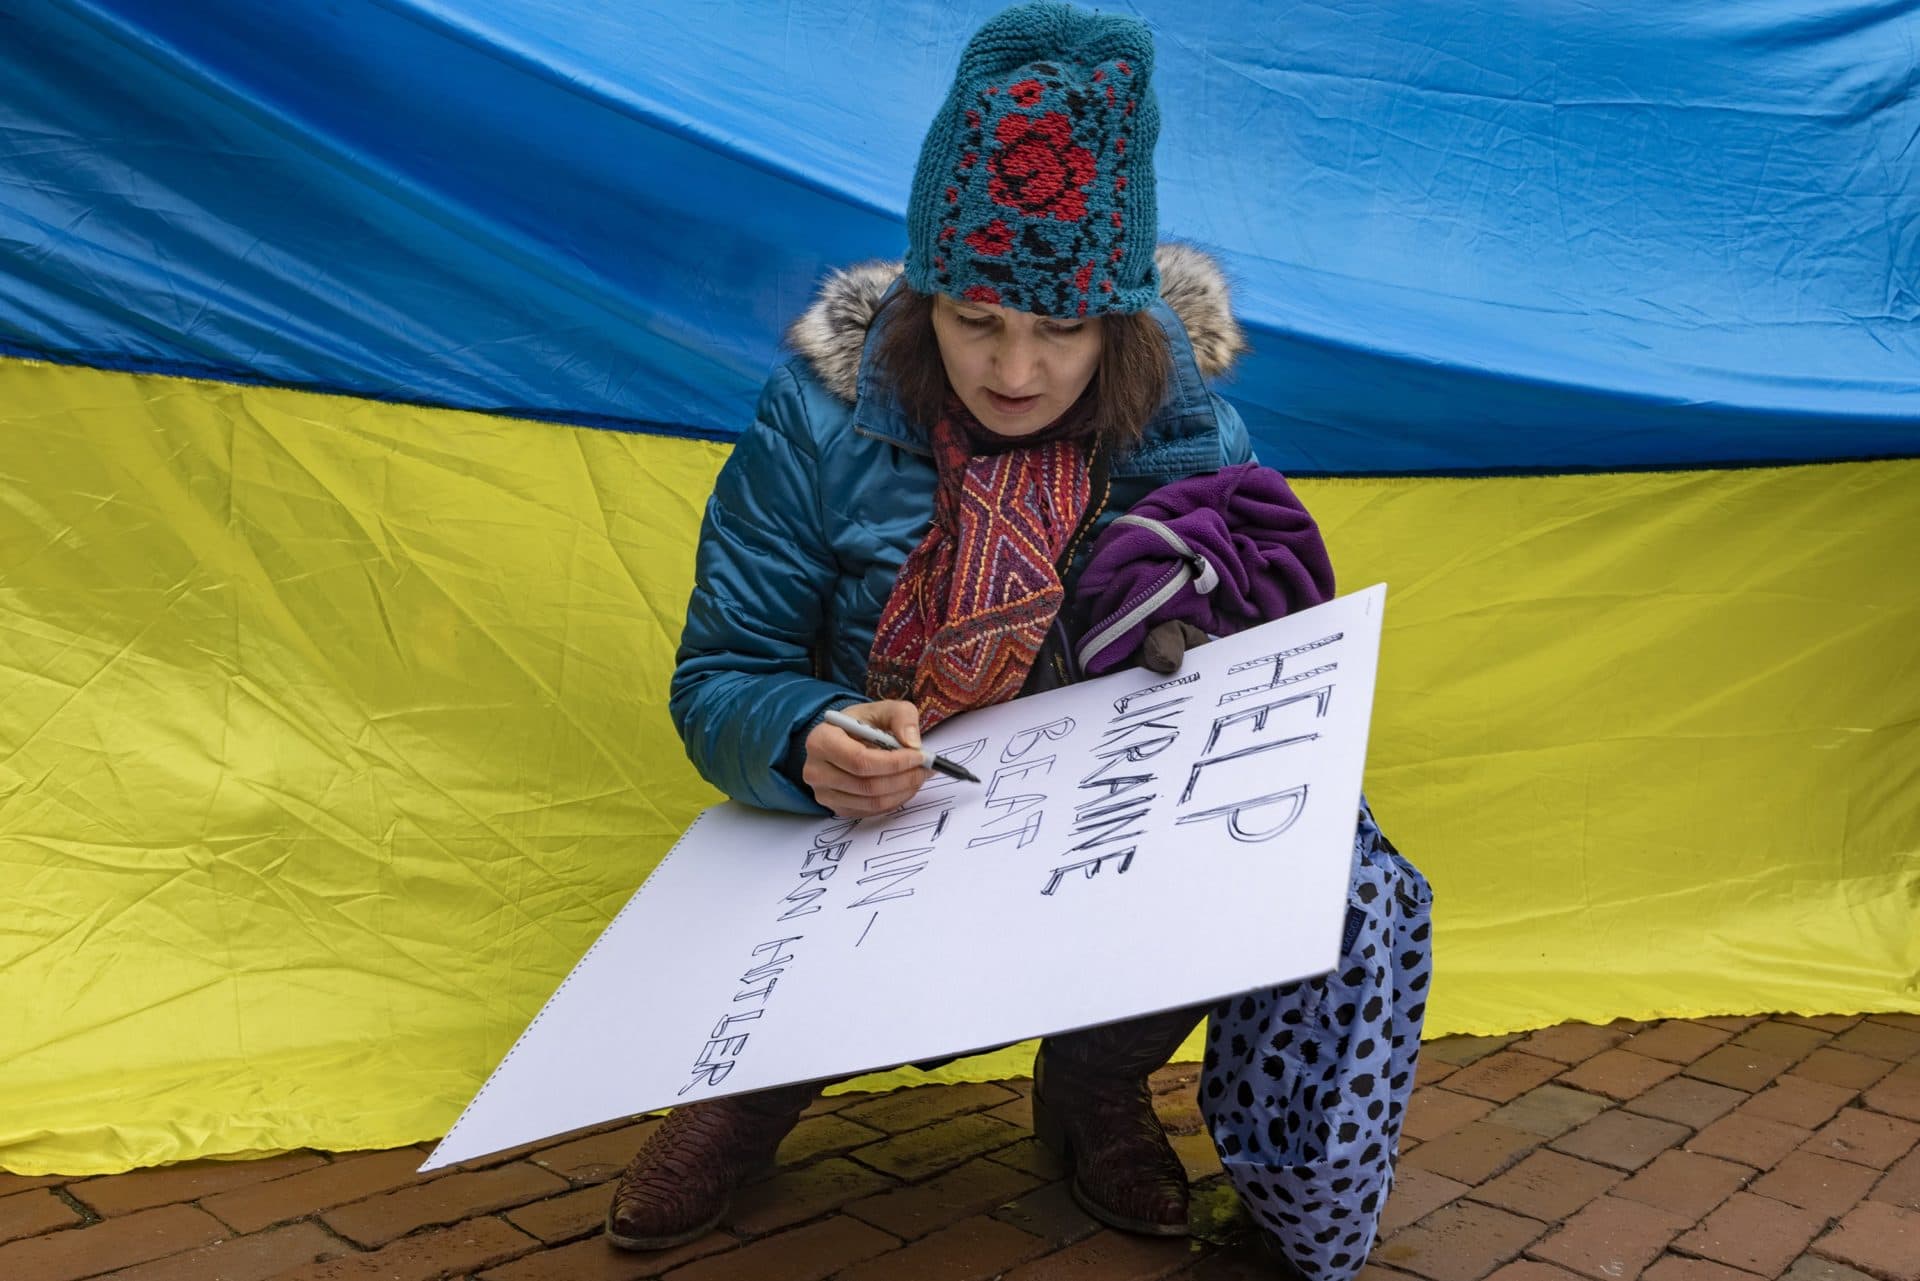 In front of the Ukrainian flag, Katya Fonrych, of Wayland, makes a sign that reads, “Help Ukraine Beat Putin-Modern Hitler,” at a rally to support Ukraine at the State House. (Jesse Costa/WBUR)